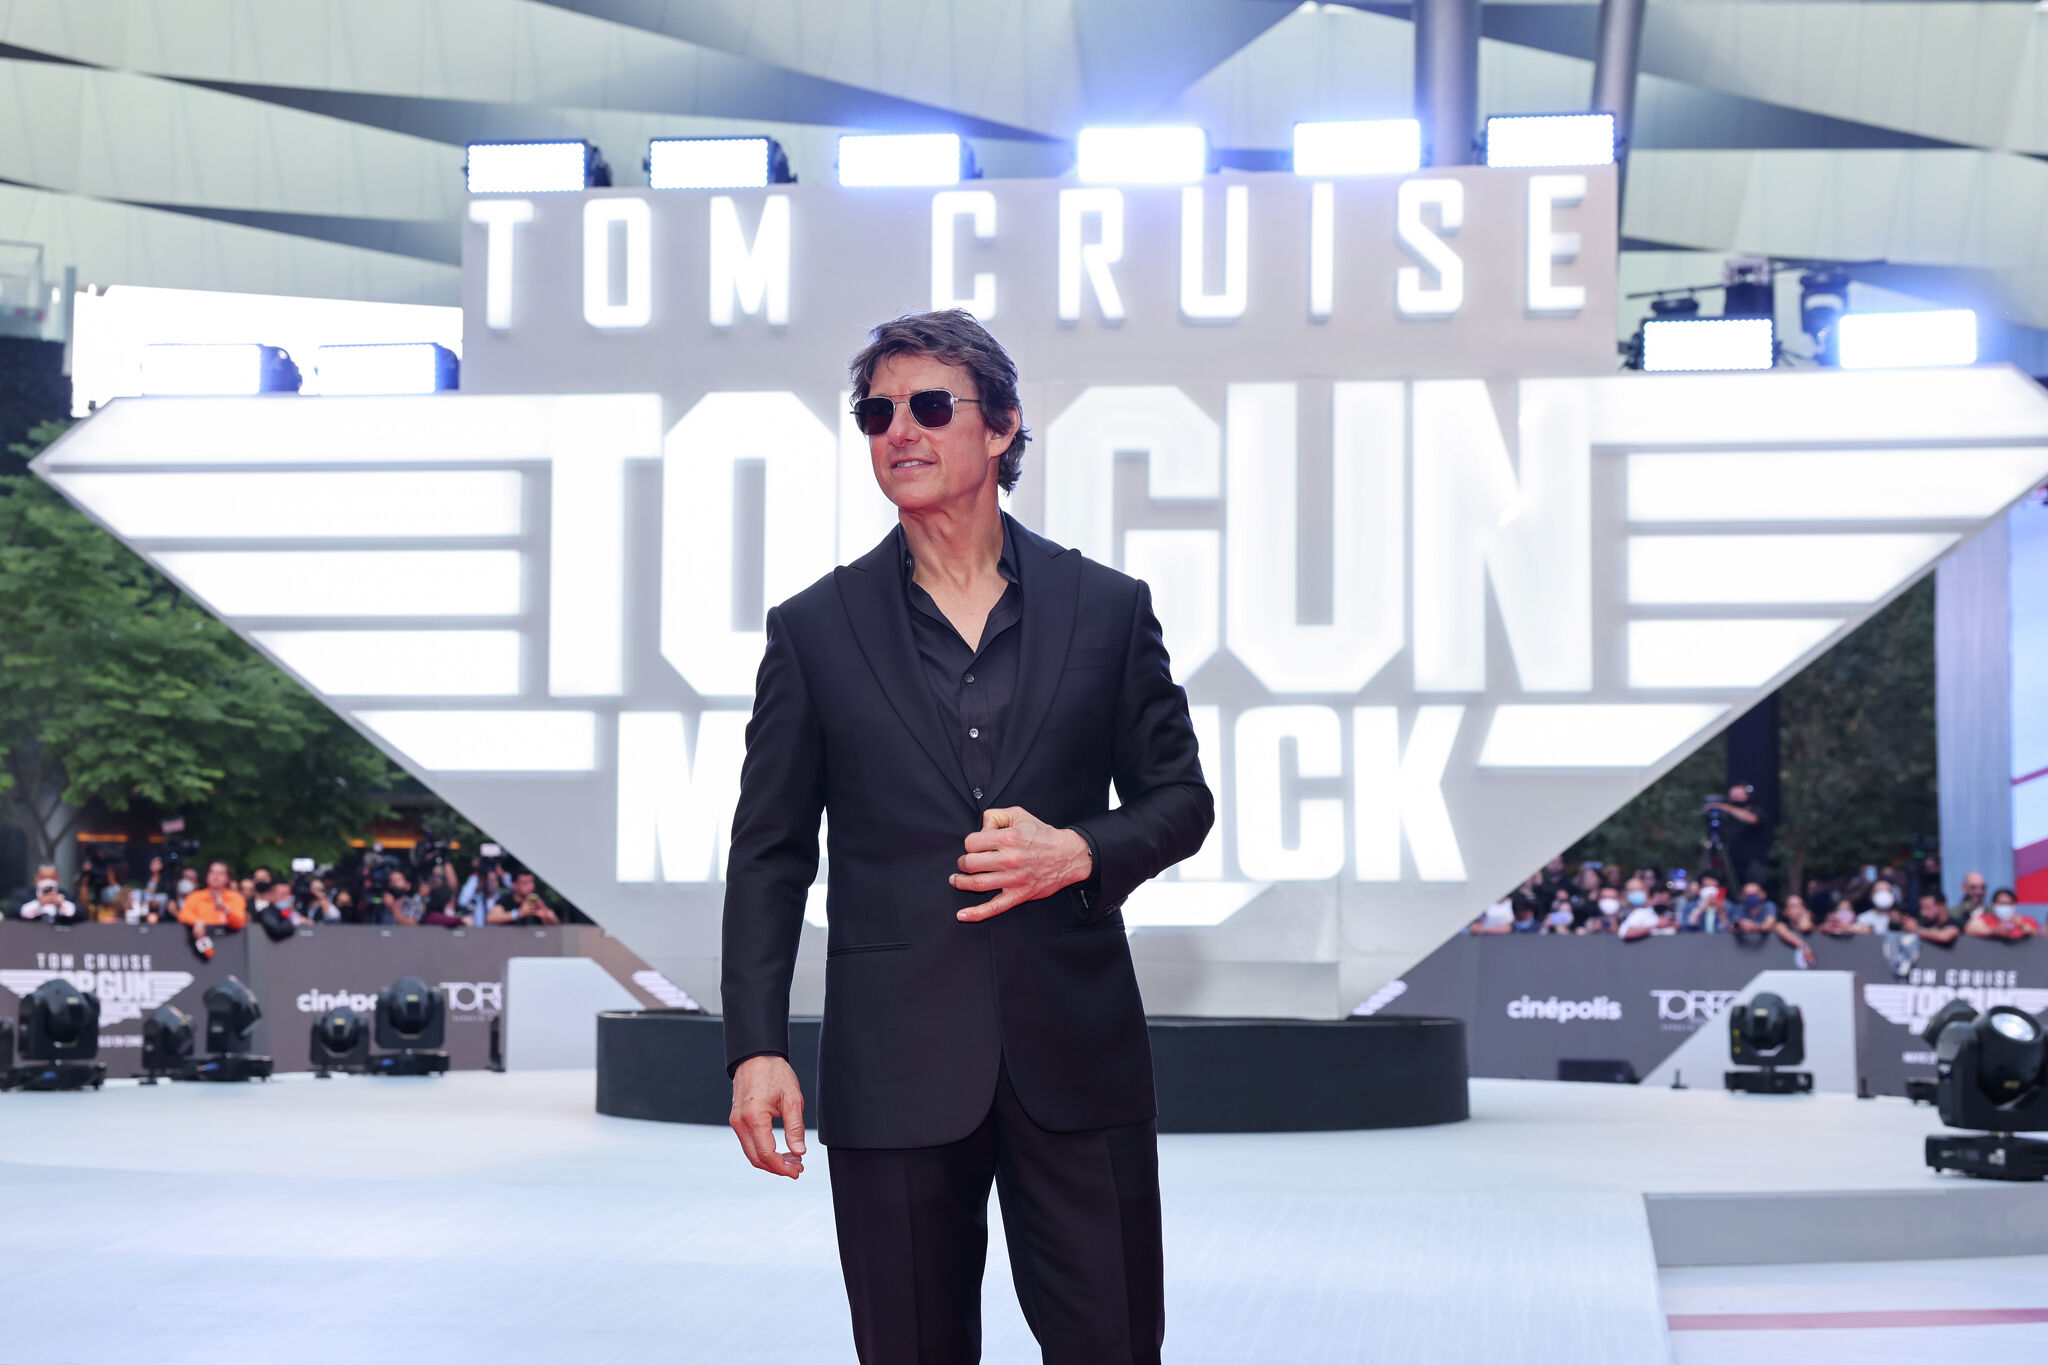 Top Gun 3 in the Works With Tom Cruise